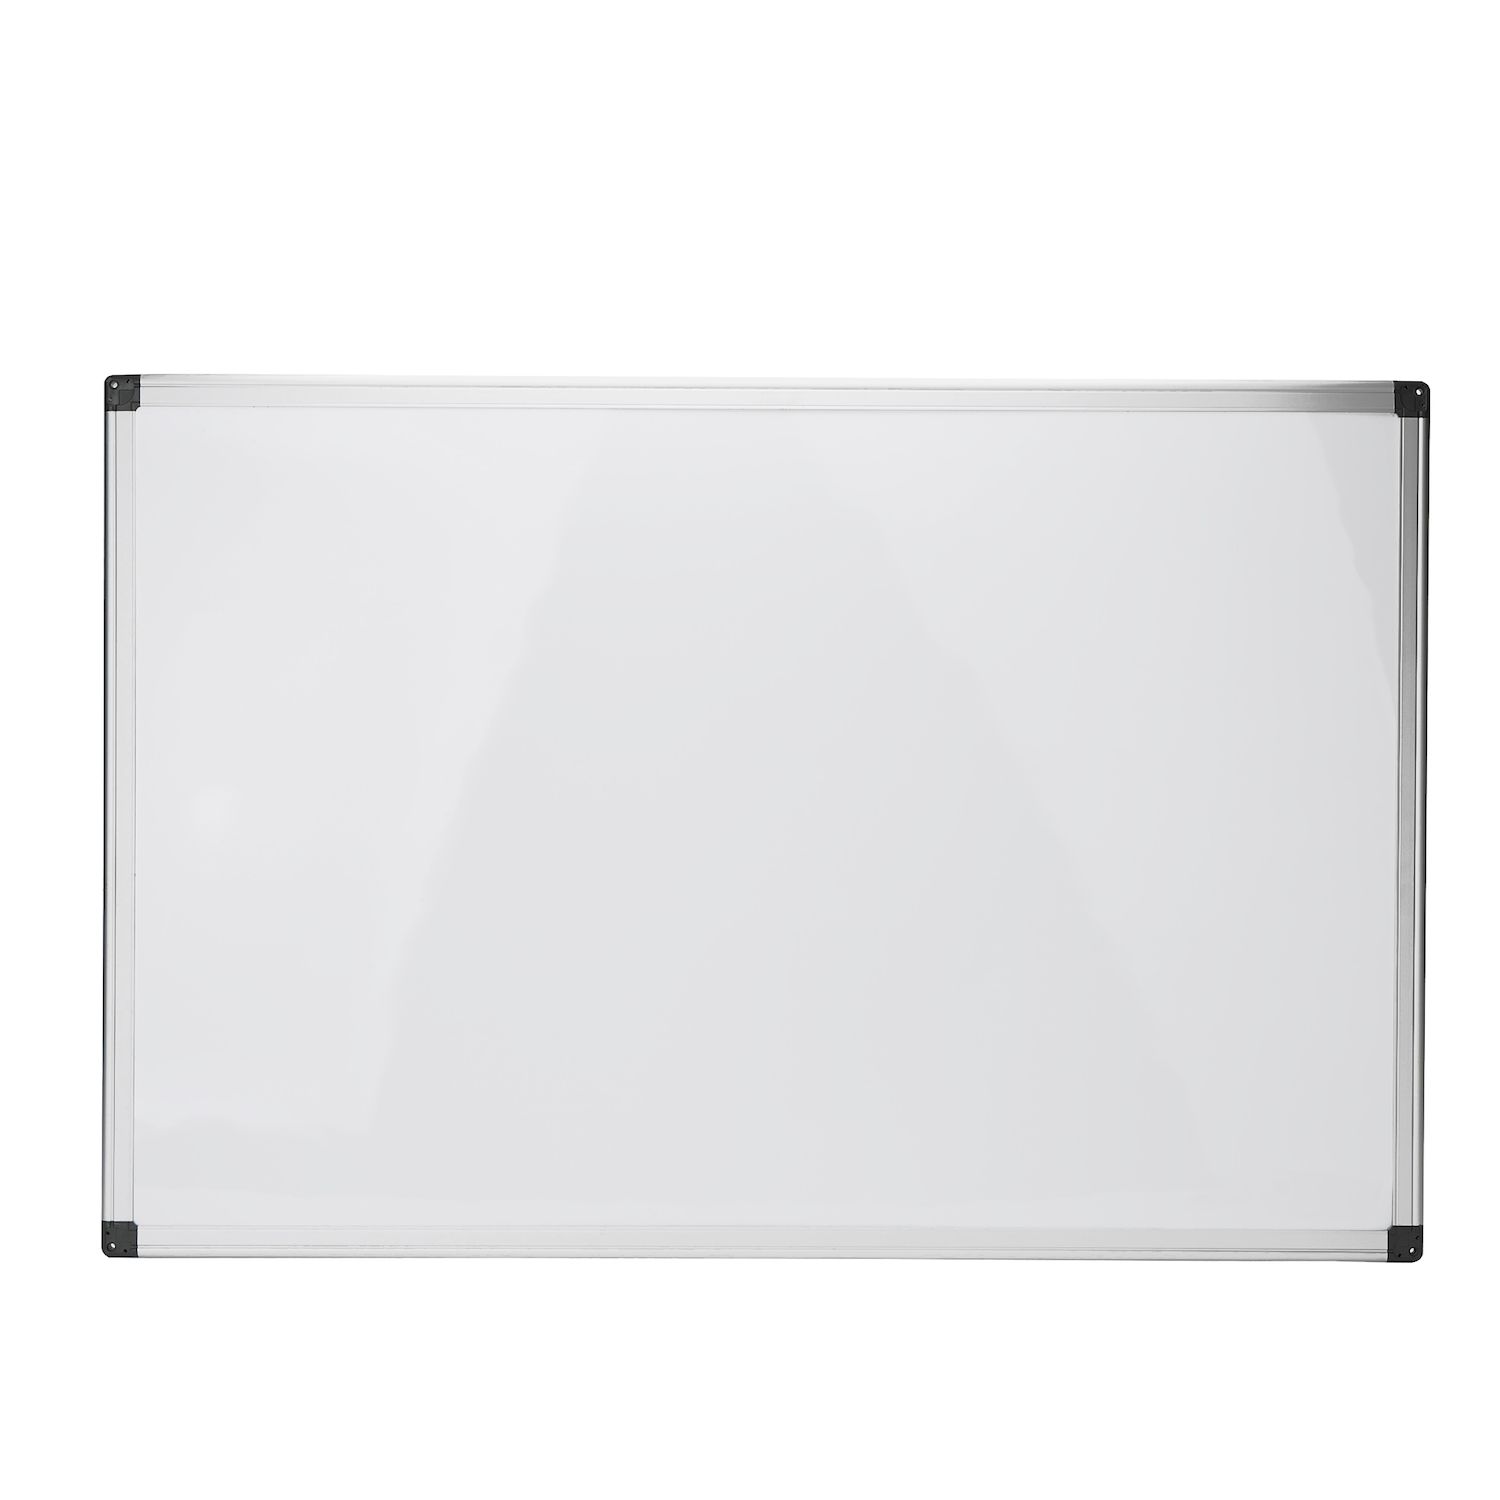 Magnetic Small White Board Dry Erase 11''x14'' - Mini Dry Erase Board  Magnetic with 6 Markers, Personal Whiteboard Magnetic for Refrigerator  Wall